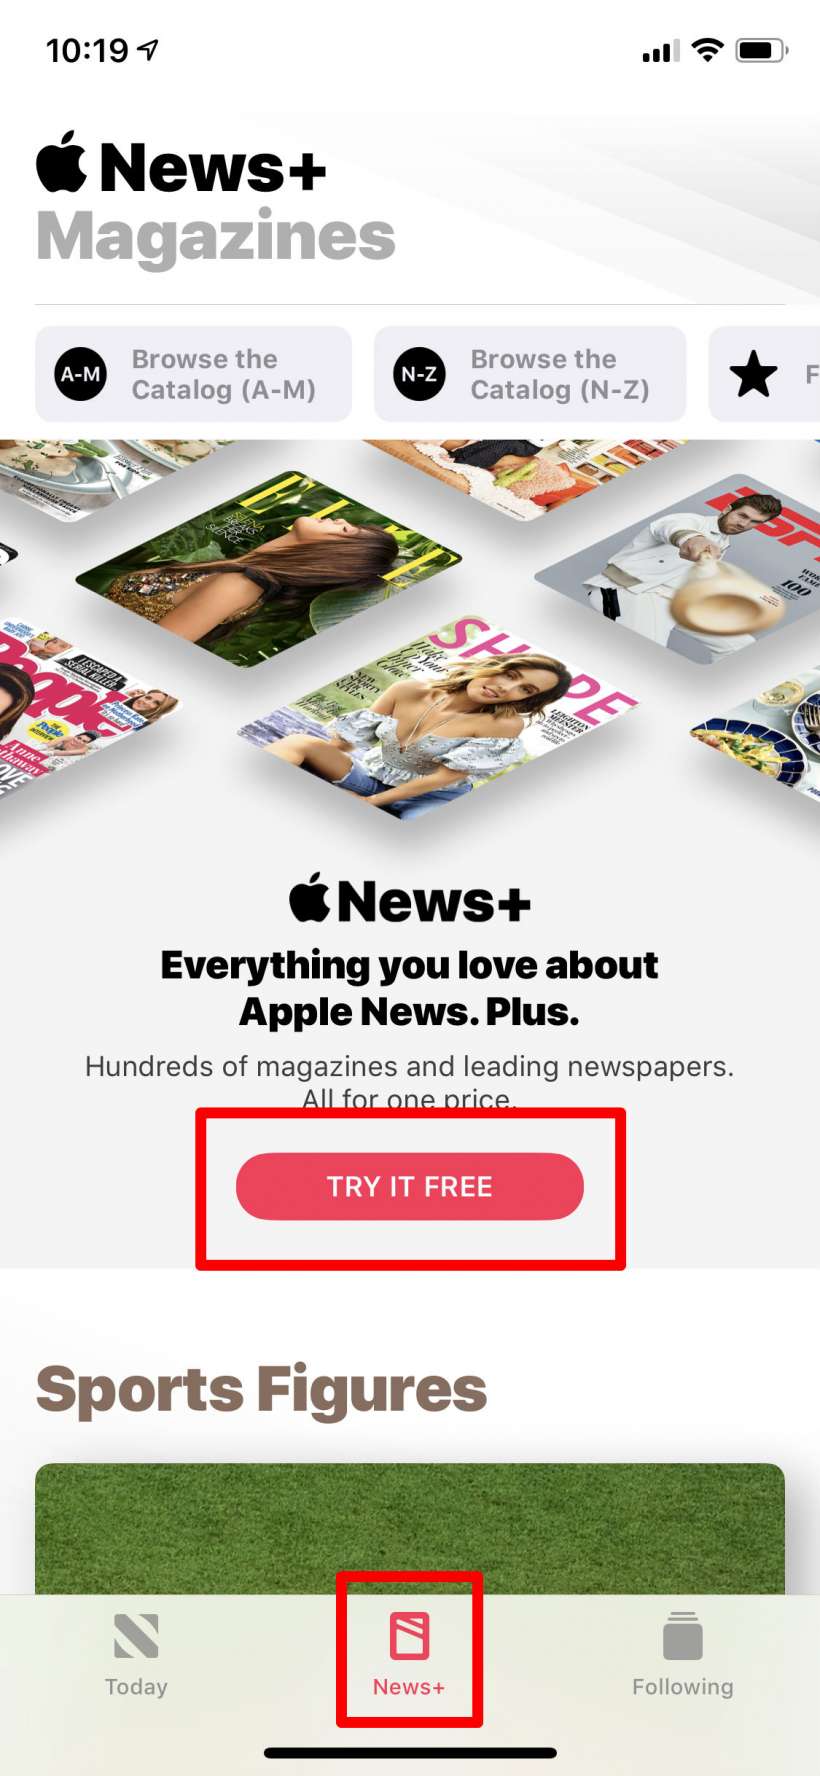 How to subscribe to Apple News Plus on iPhone and iPad.